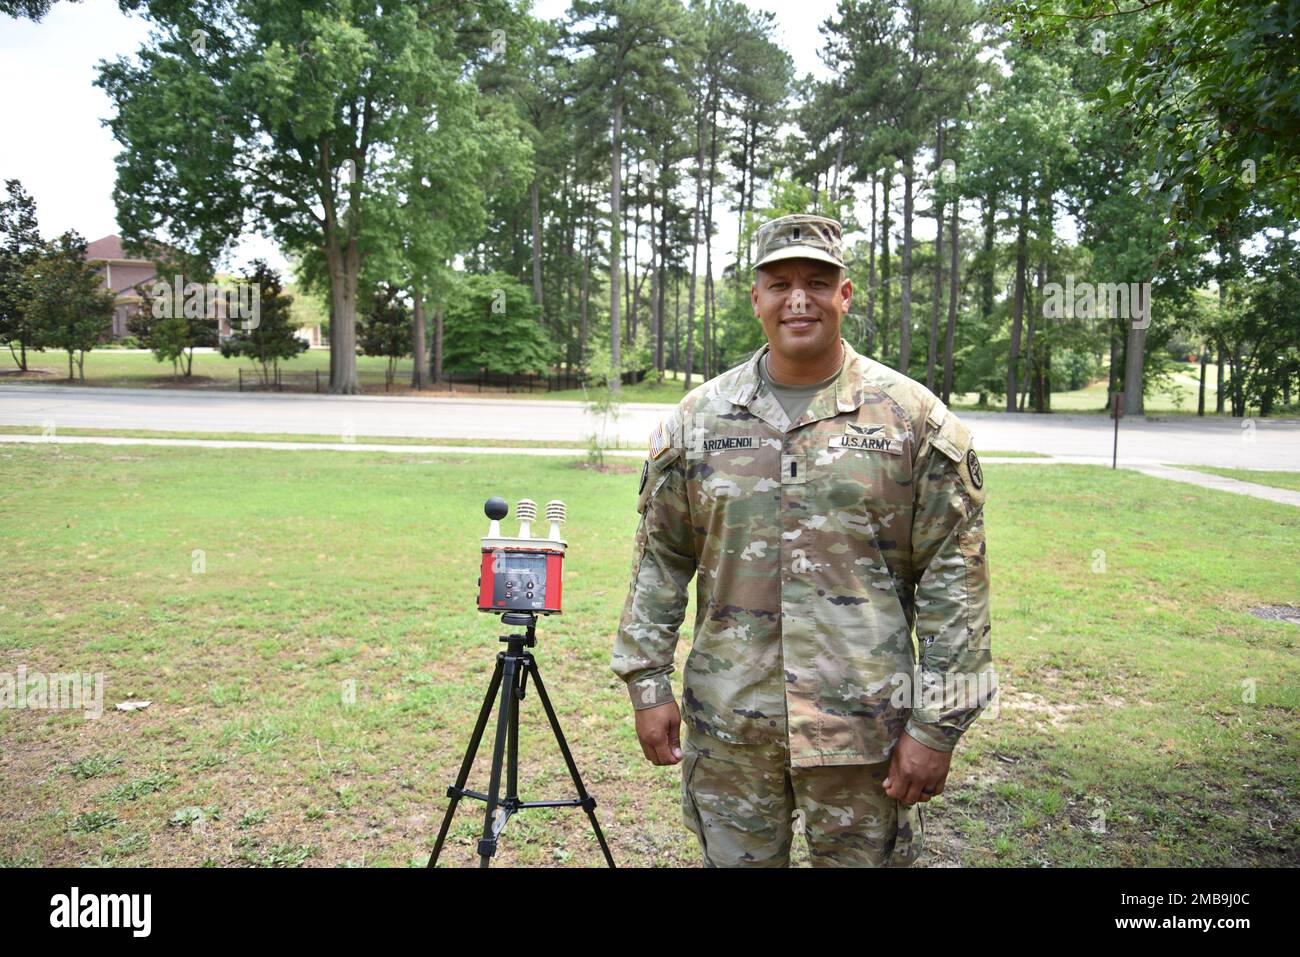 1st Lt. Ansel Arizmendi, chief of Environmental Health, Womack Army Medical Center (WAMC), stands beside the Wet Bulb Globe Temperature Monitor (WBGT) device used to monitor heating conditions outside of the Public Health building on Fort Bragg on June 13, 2022. Stock Photo